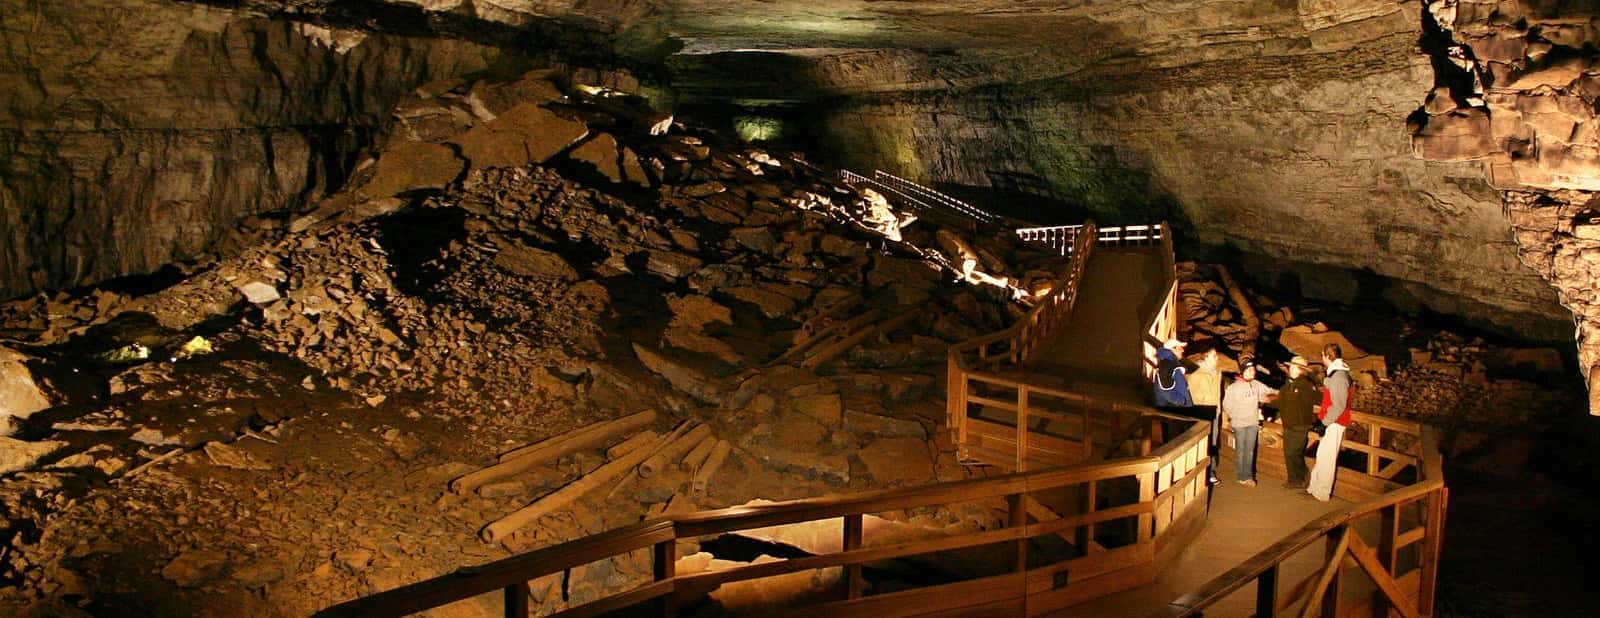 mammoth-cave-cropped-jpg